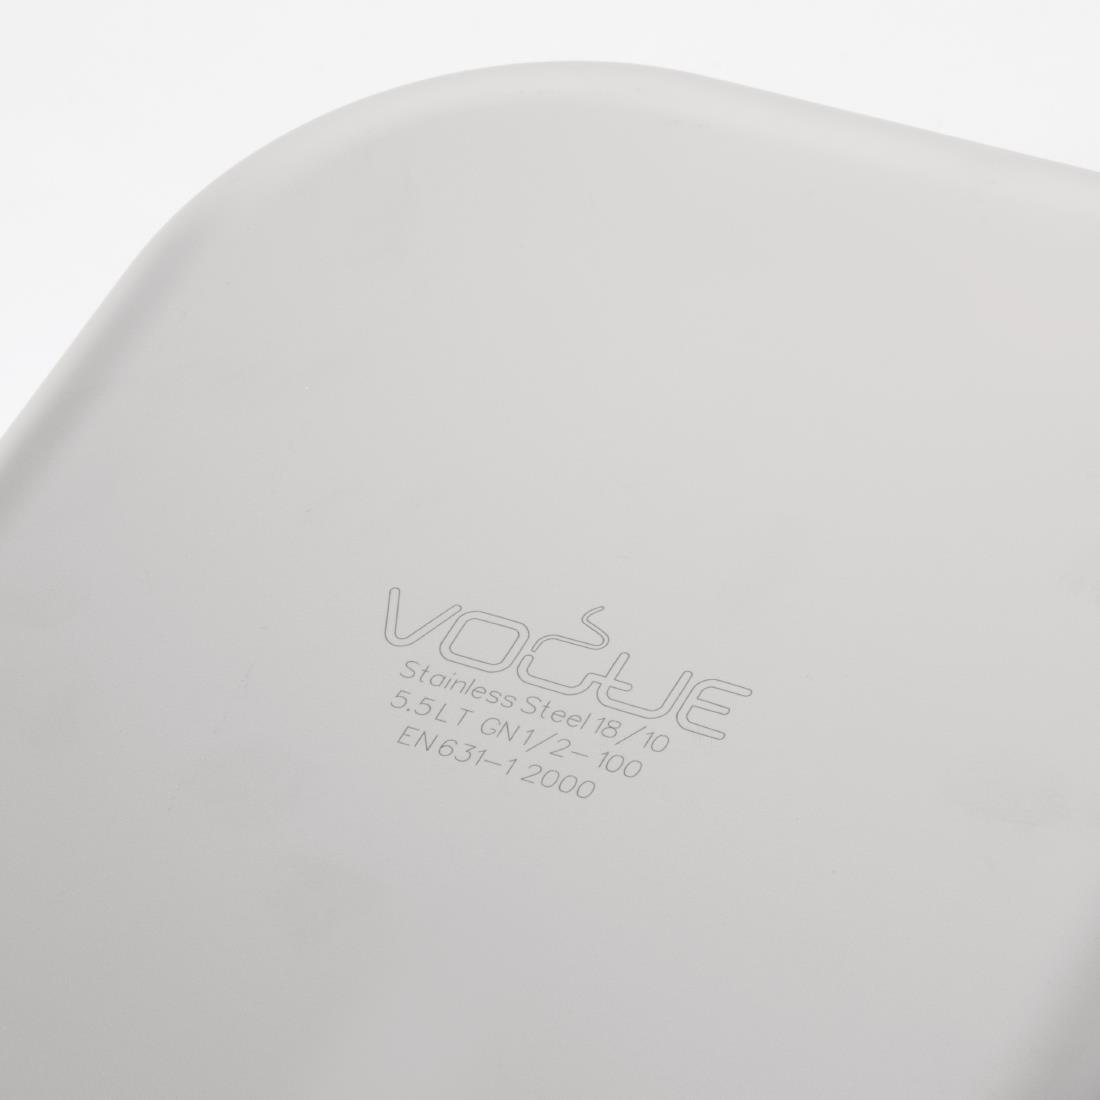 Vogue Heavy Duty Stainless Steel 1/2 Gastronorm Pan 100mm - DW439  - 7